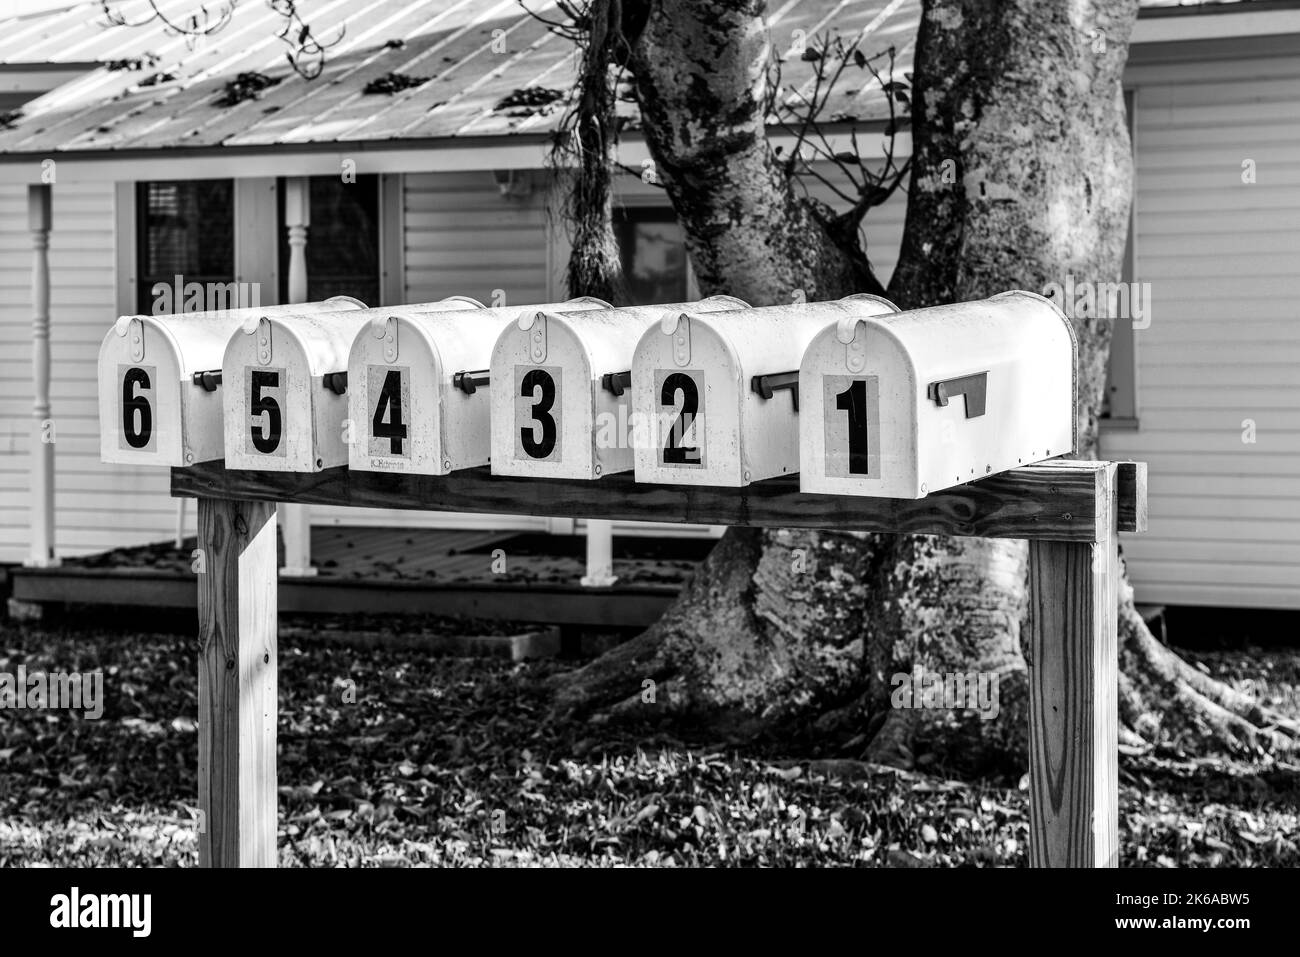 A simplistic yet graphic presentation of six identical mailboxes in a row with homemade wooden stand, and large numerals one through six in black in w Stock Photo